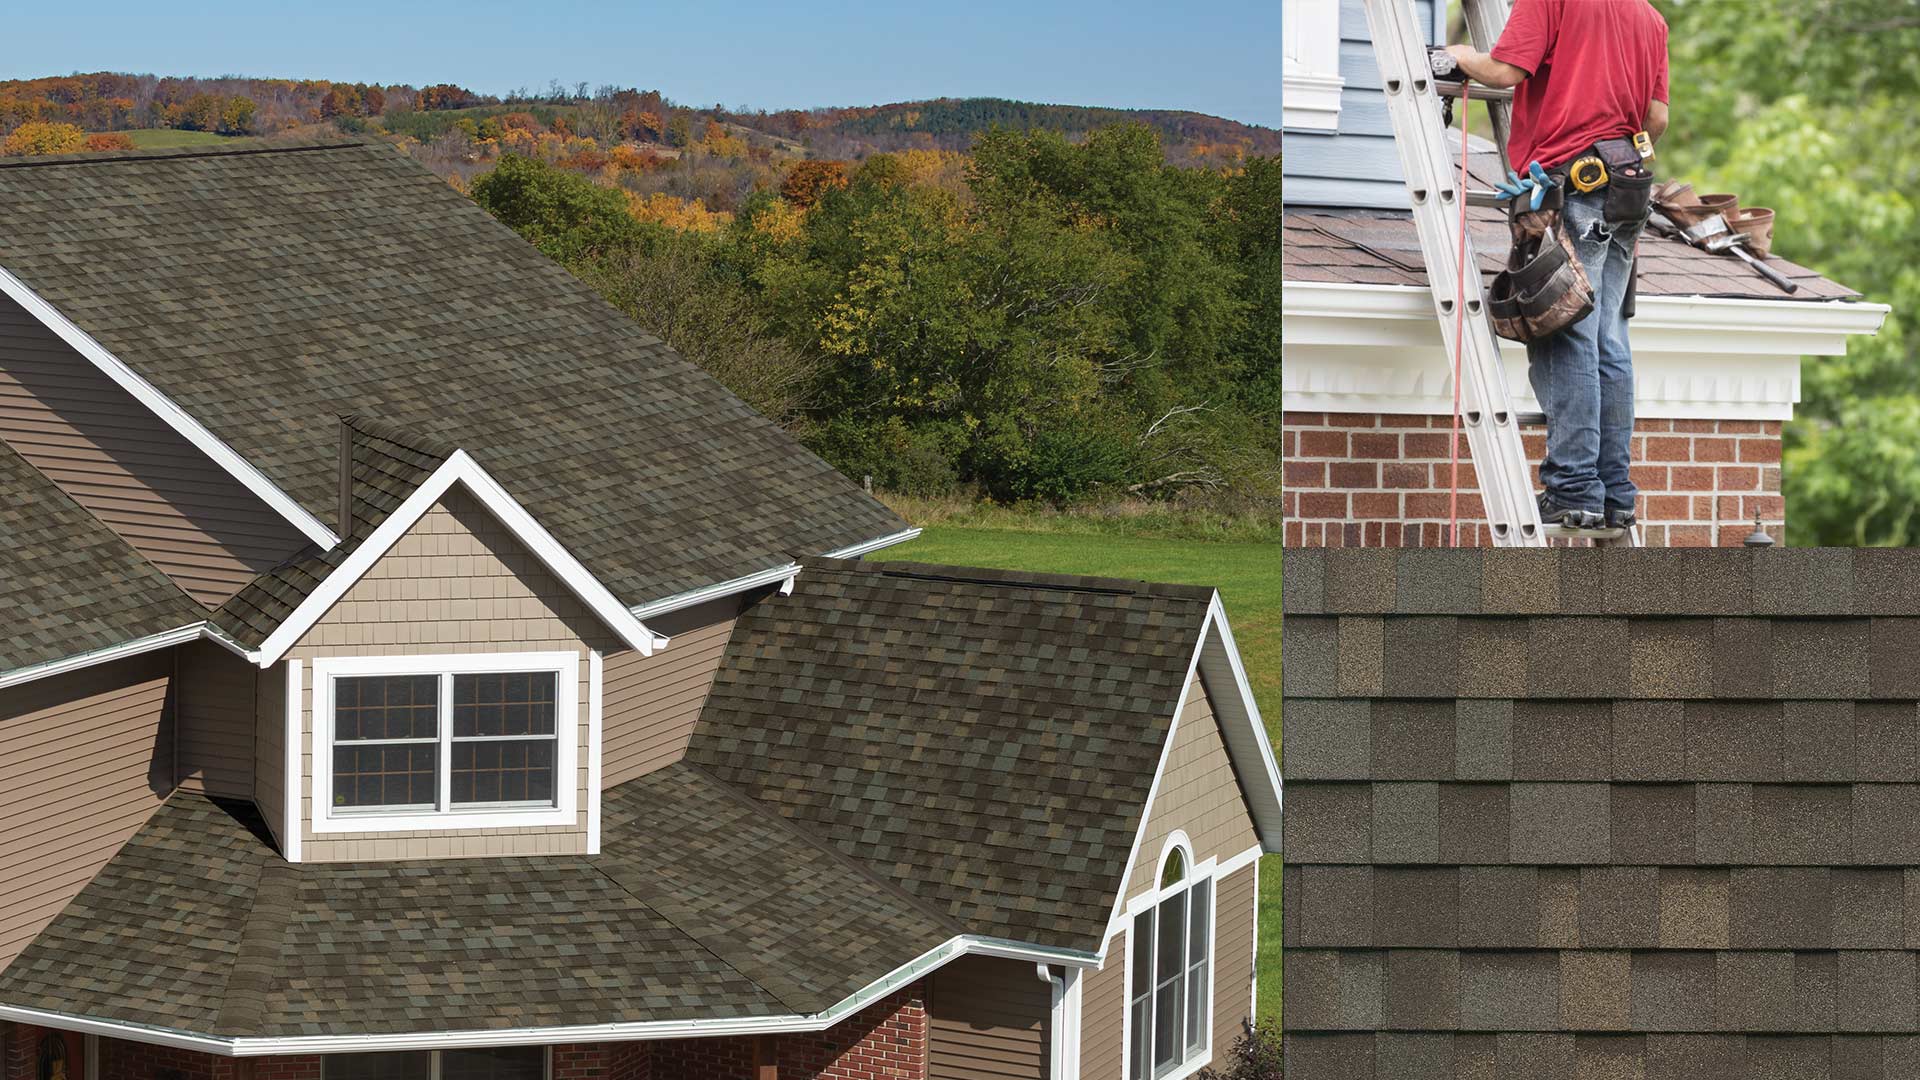 montage of a house, shingles, and a worker on a ladder